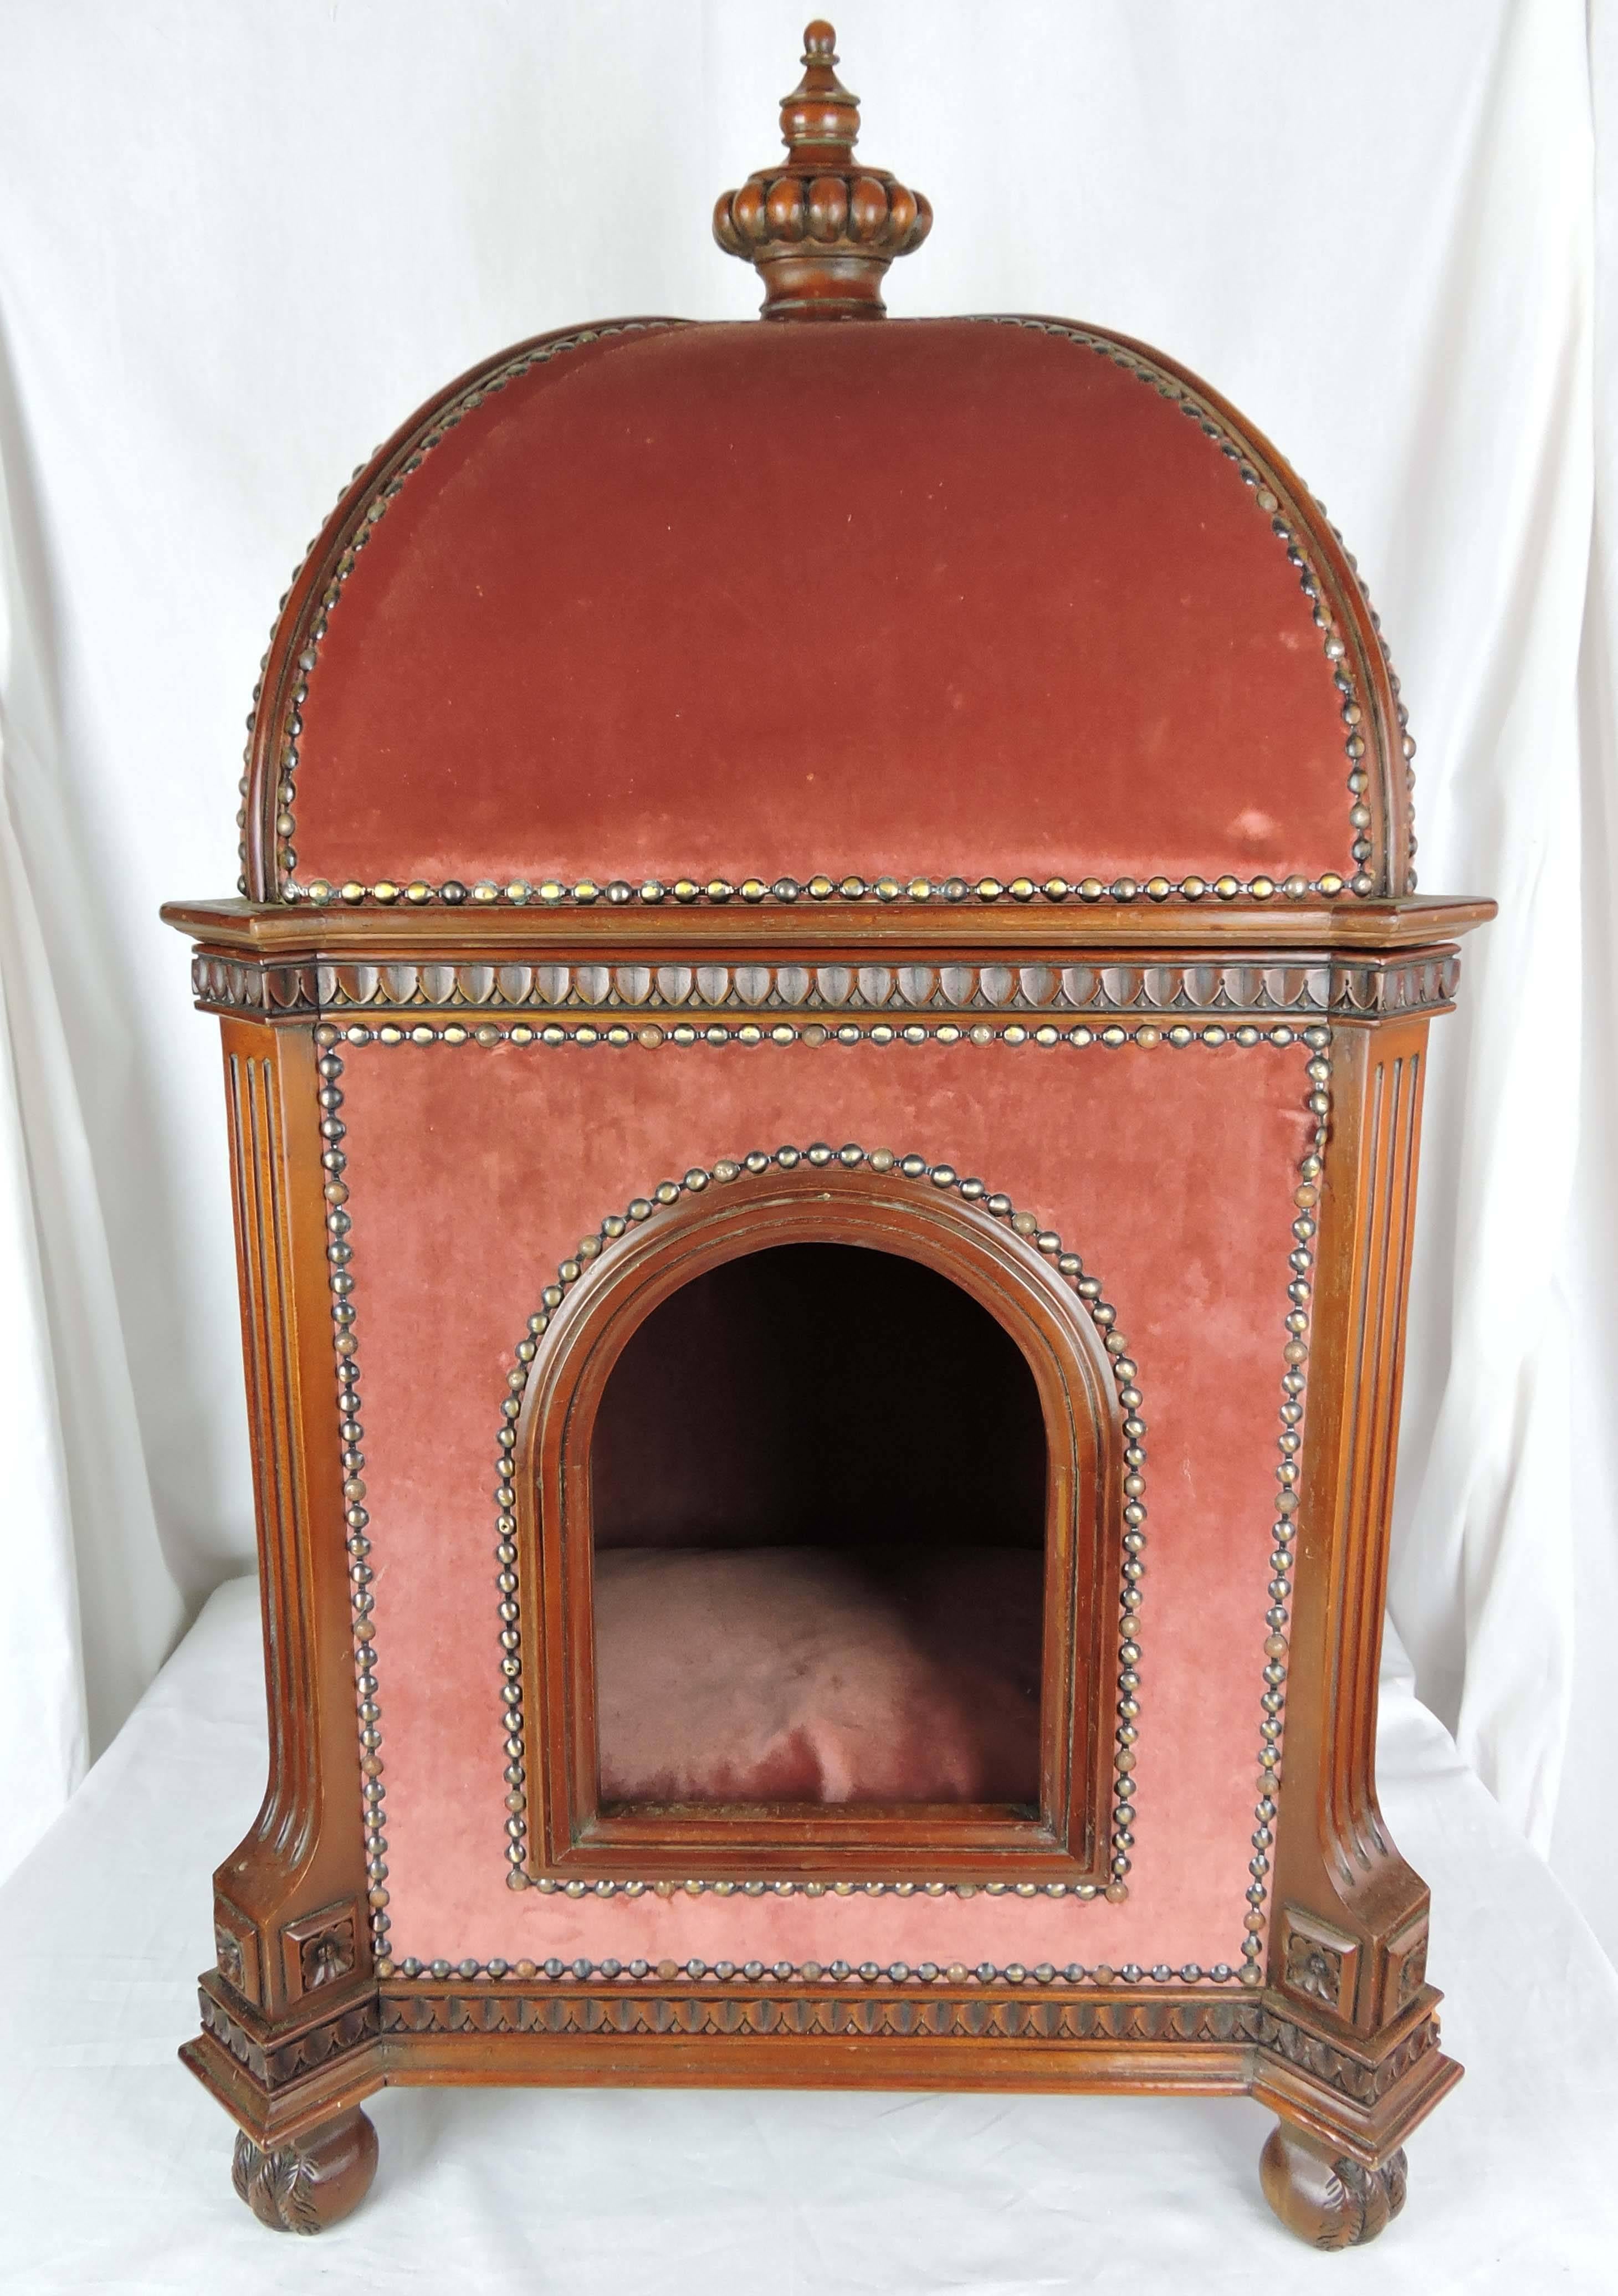 The last word in luxury for your preferred domestic companion: We offer a Louis XVI style pet bed of mahogany, upholstered inside and out, in Vieux Rose cotton velvet, with a removable cushion. The exterior framing has carved detailing. The pet bed